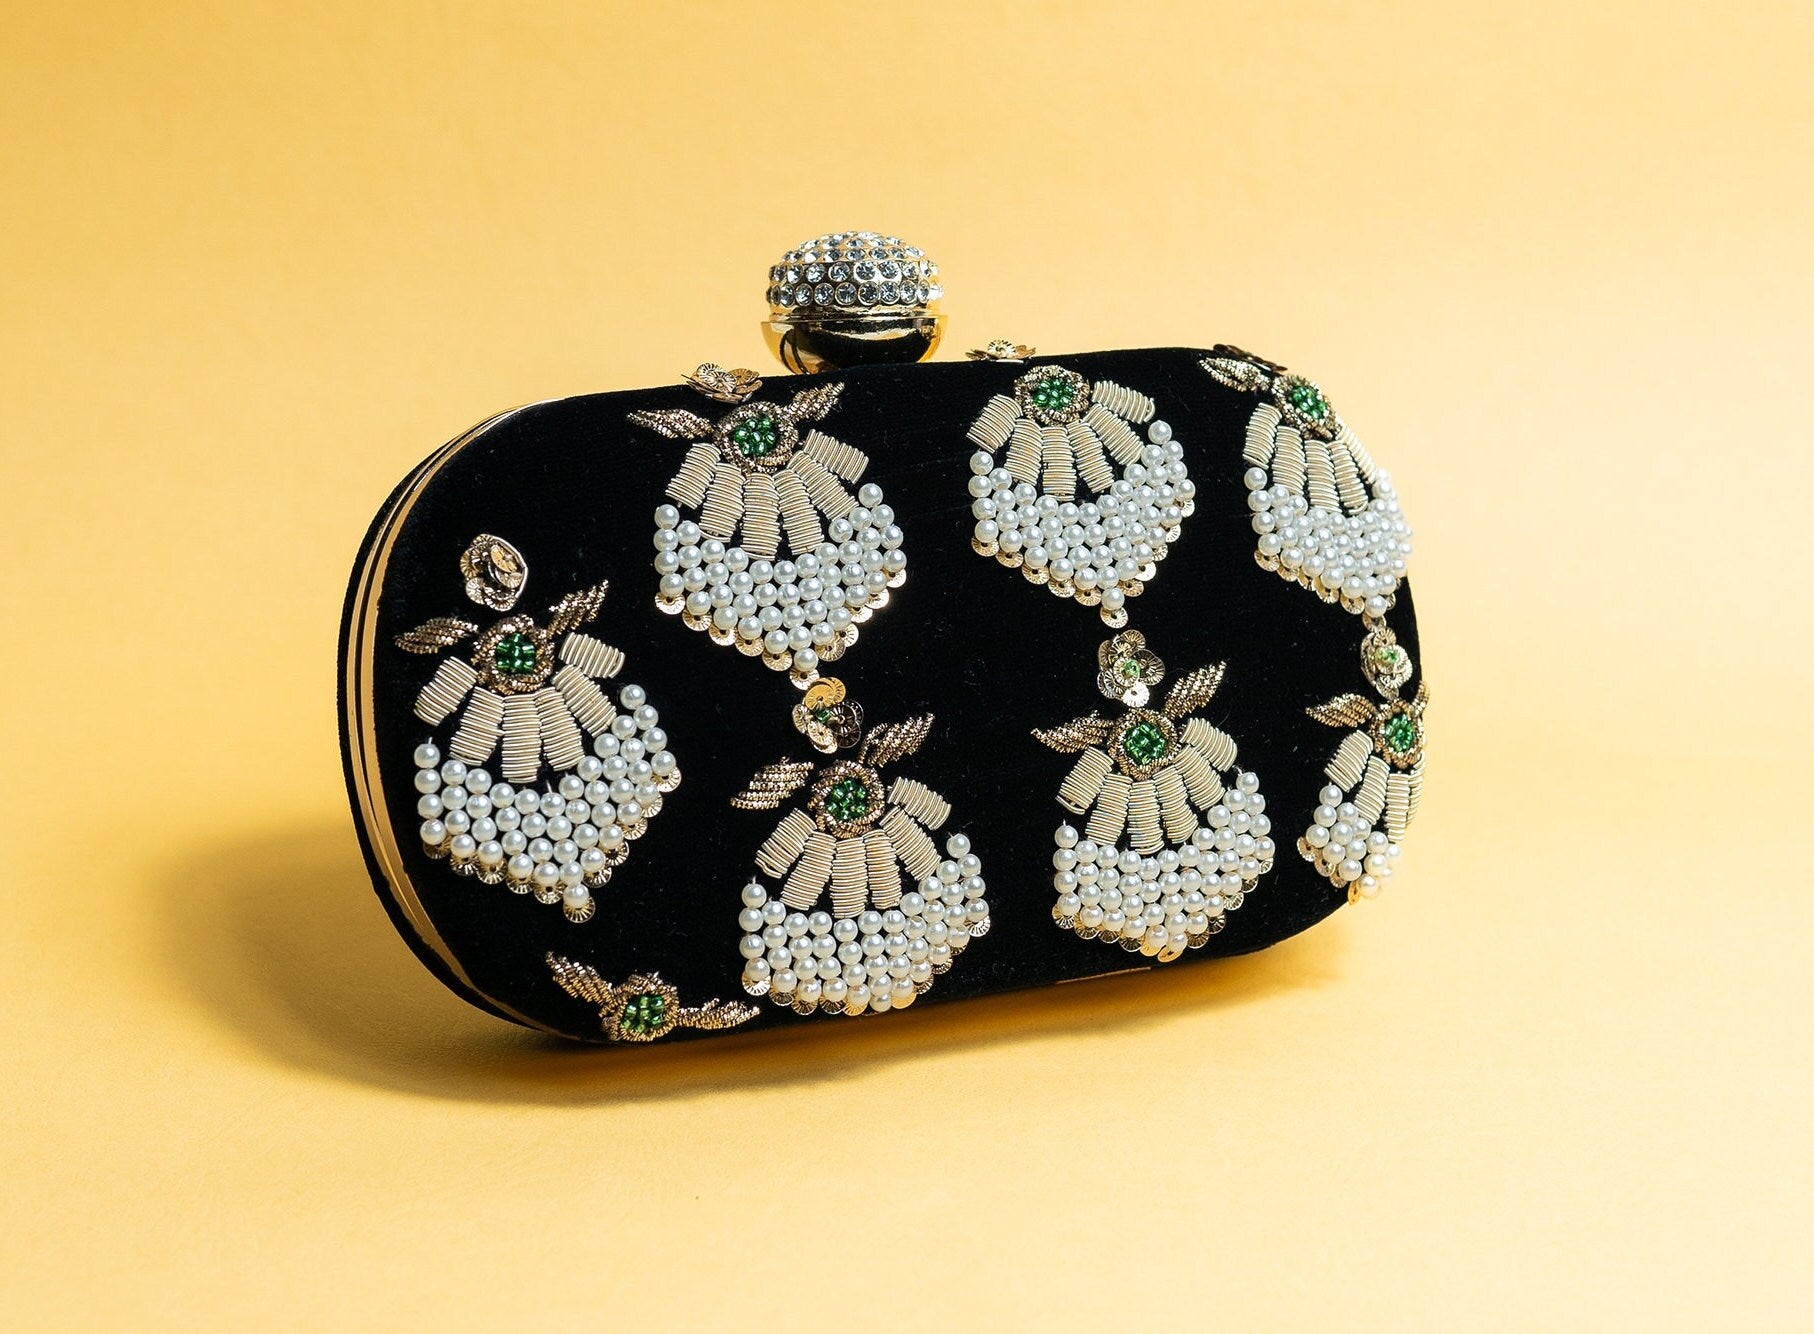 Black bead embroidery clutch bag with detachable sling